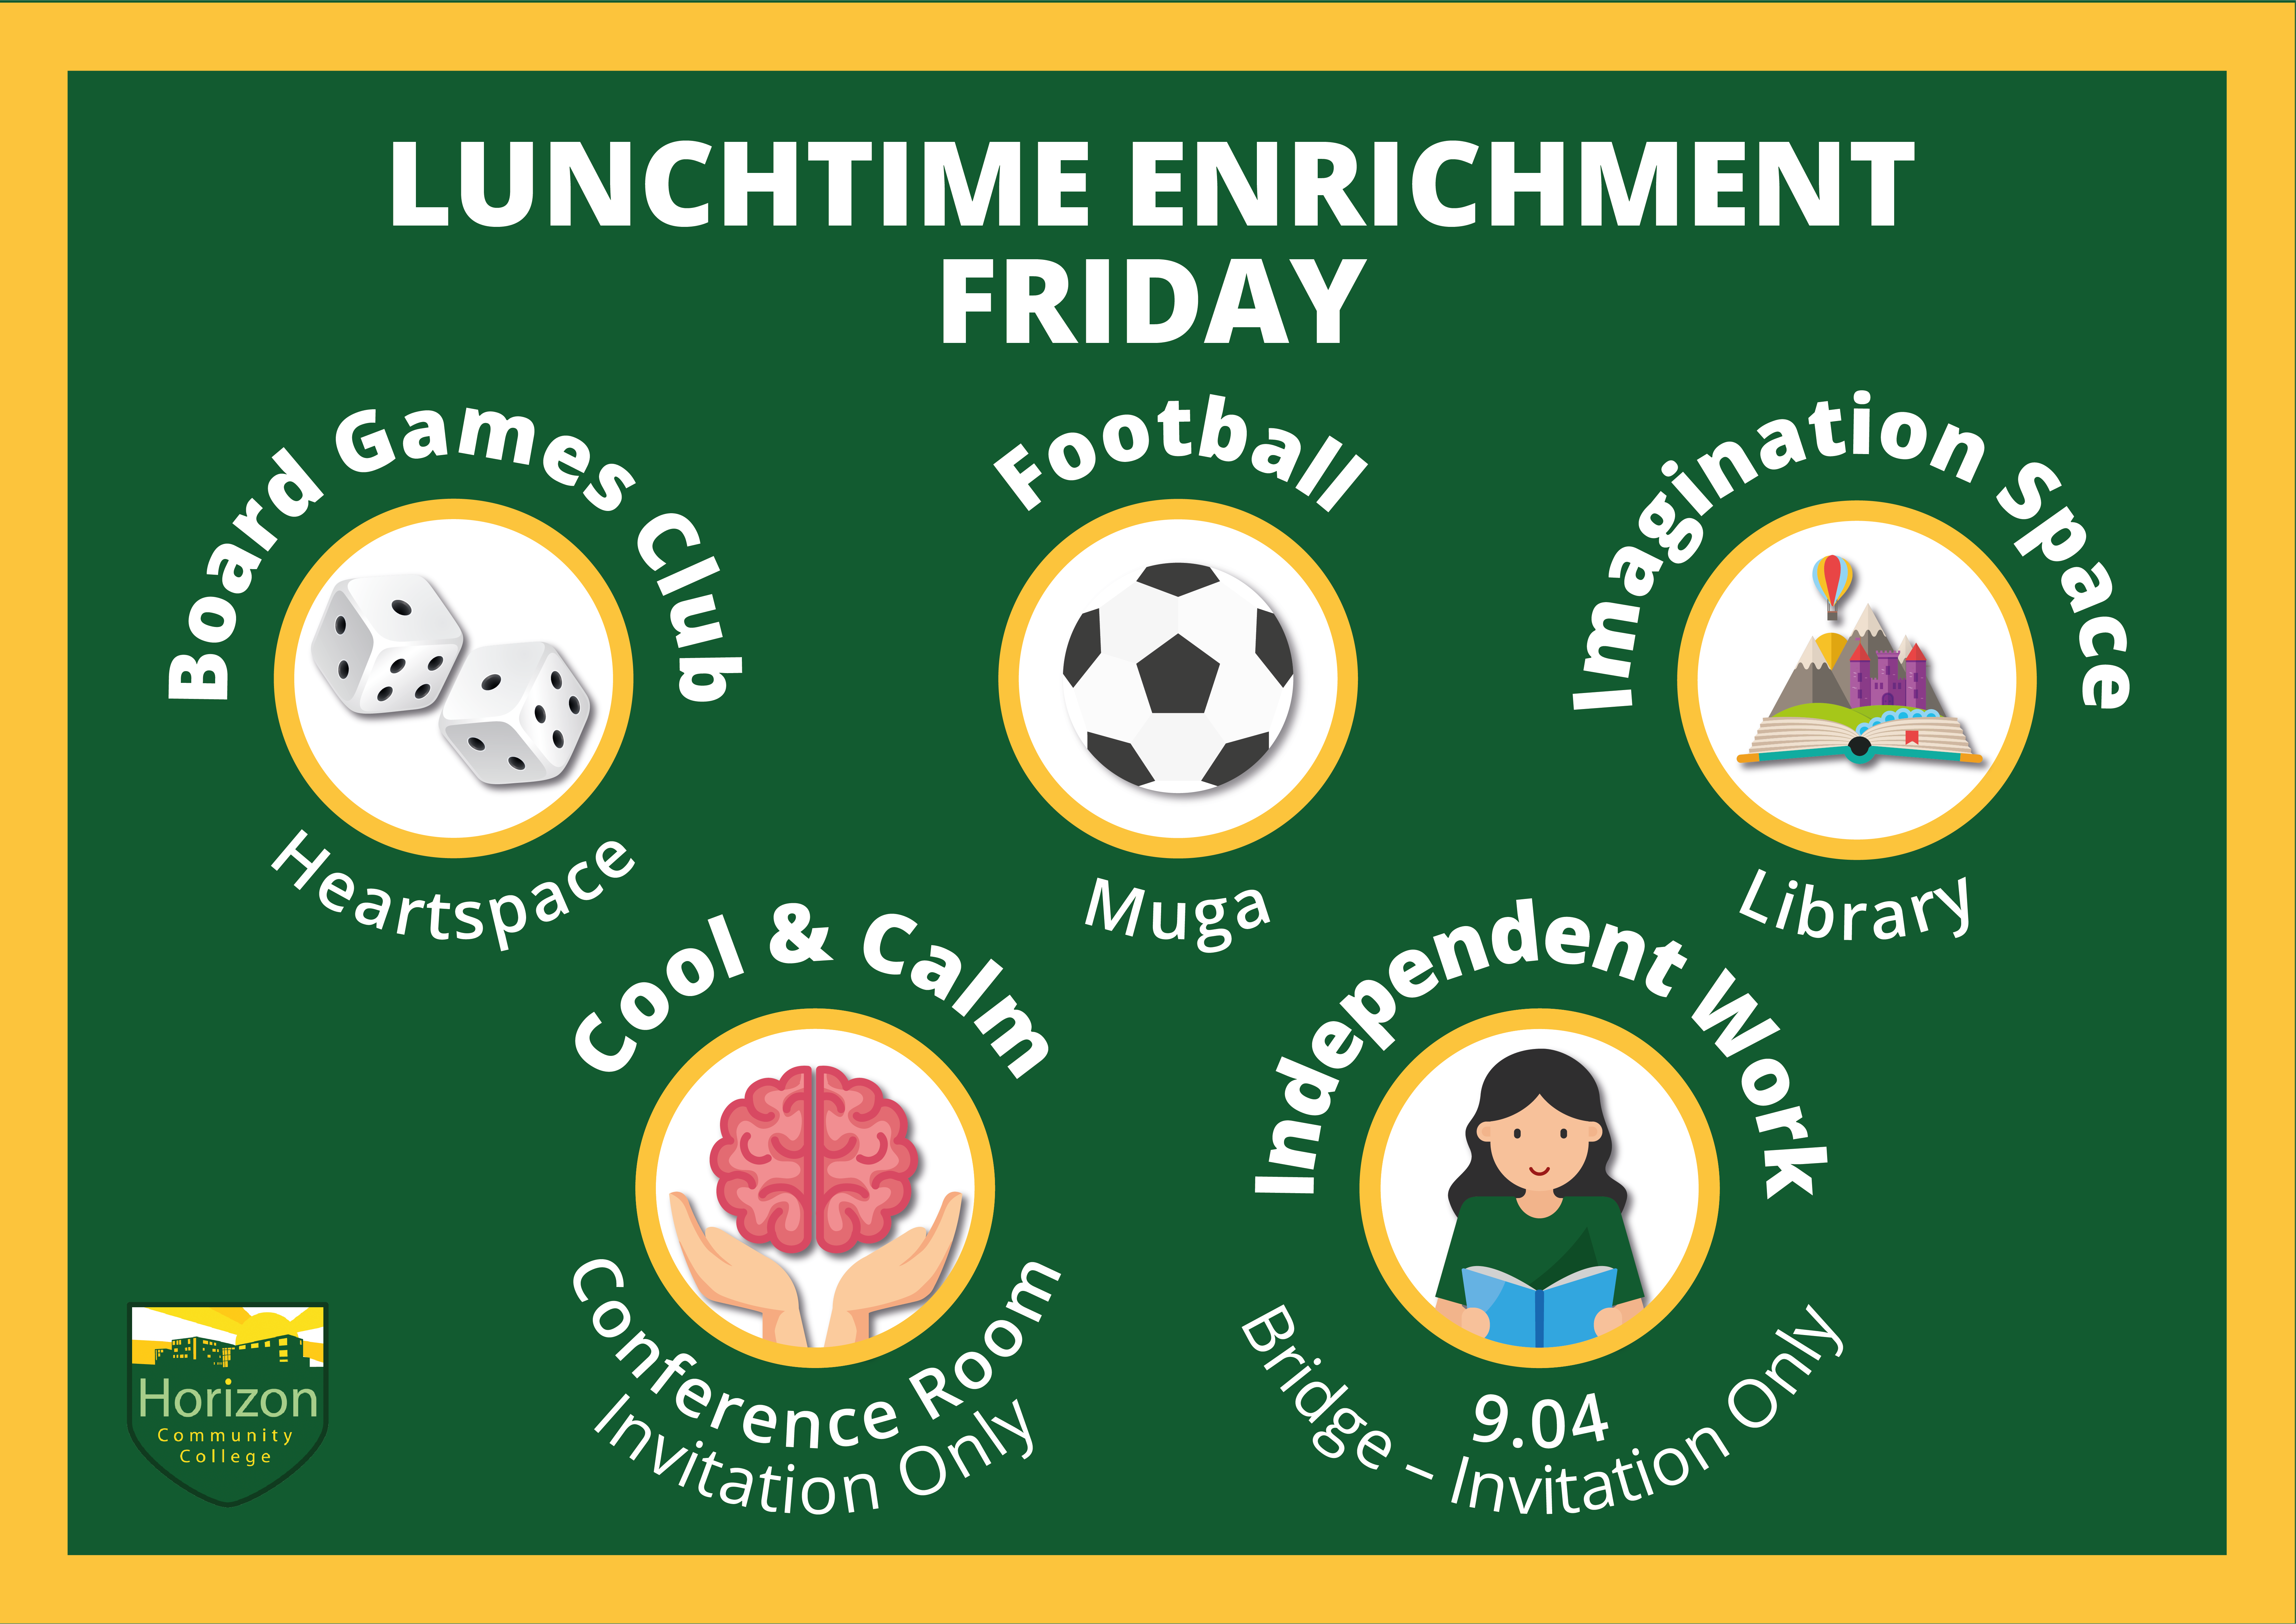 Lunchtime enrichment Friday